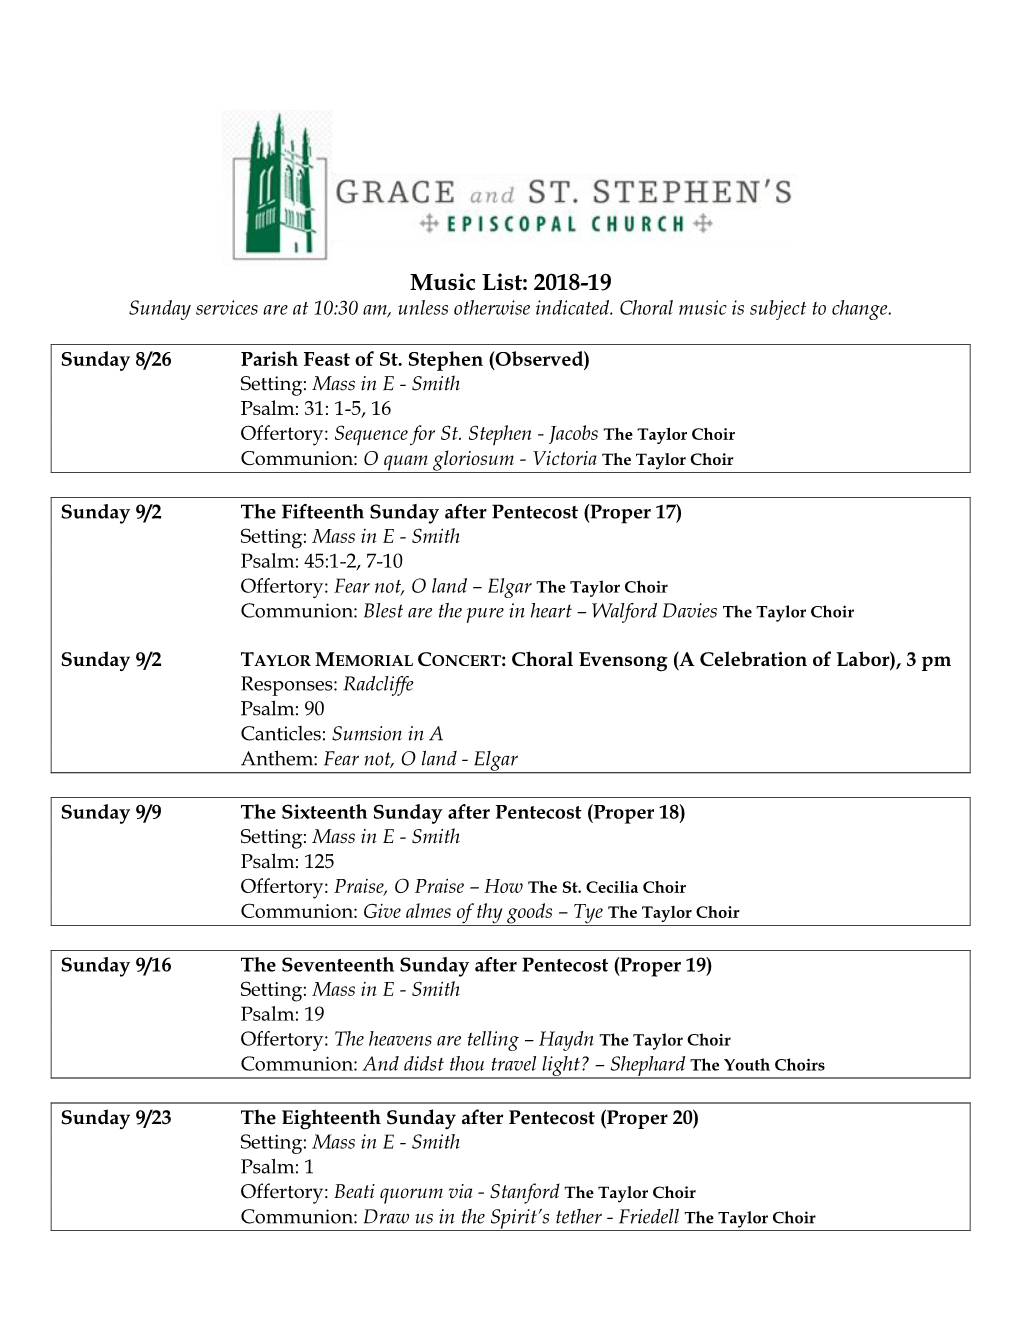 Music List: 2018-19 Sunday Services Are at 10:30 Am, Unless Otherwise Indicated